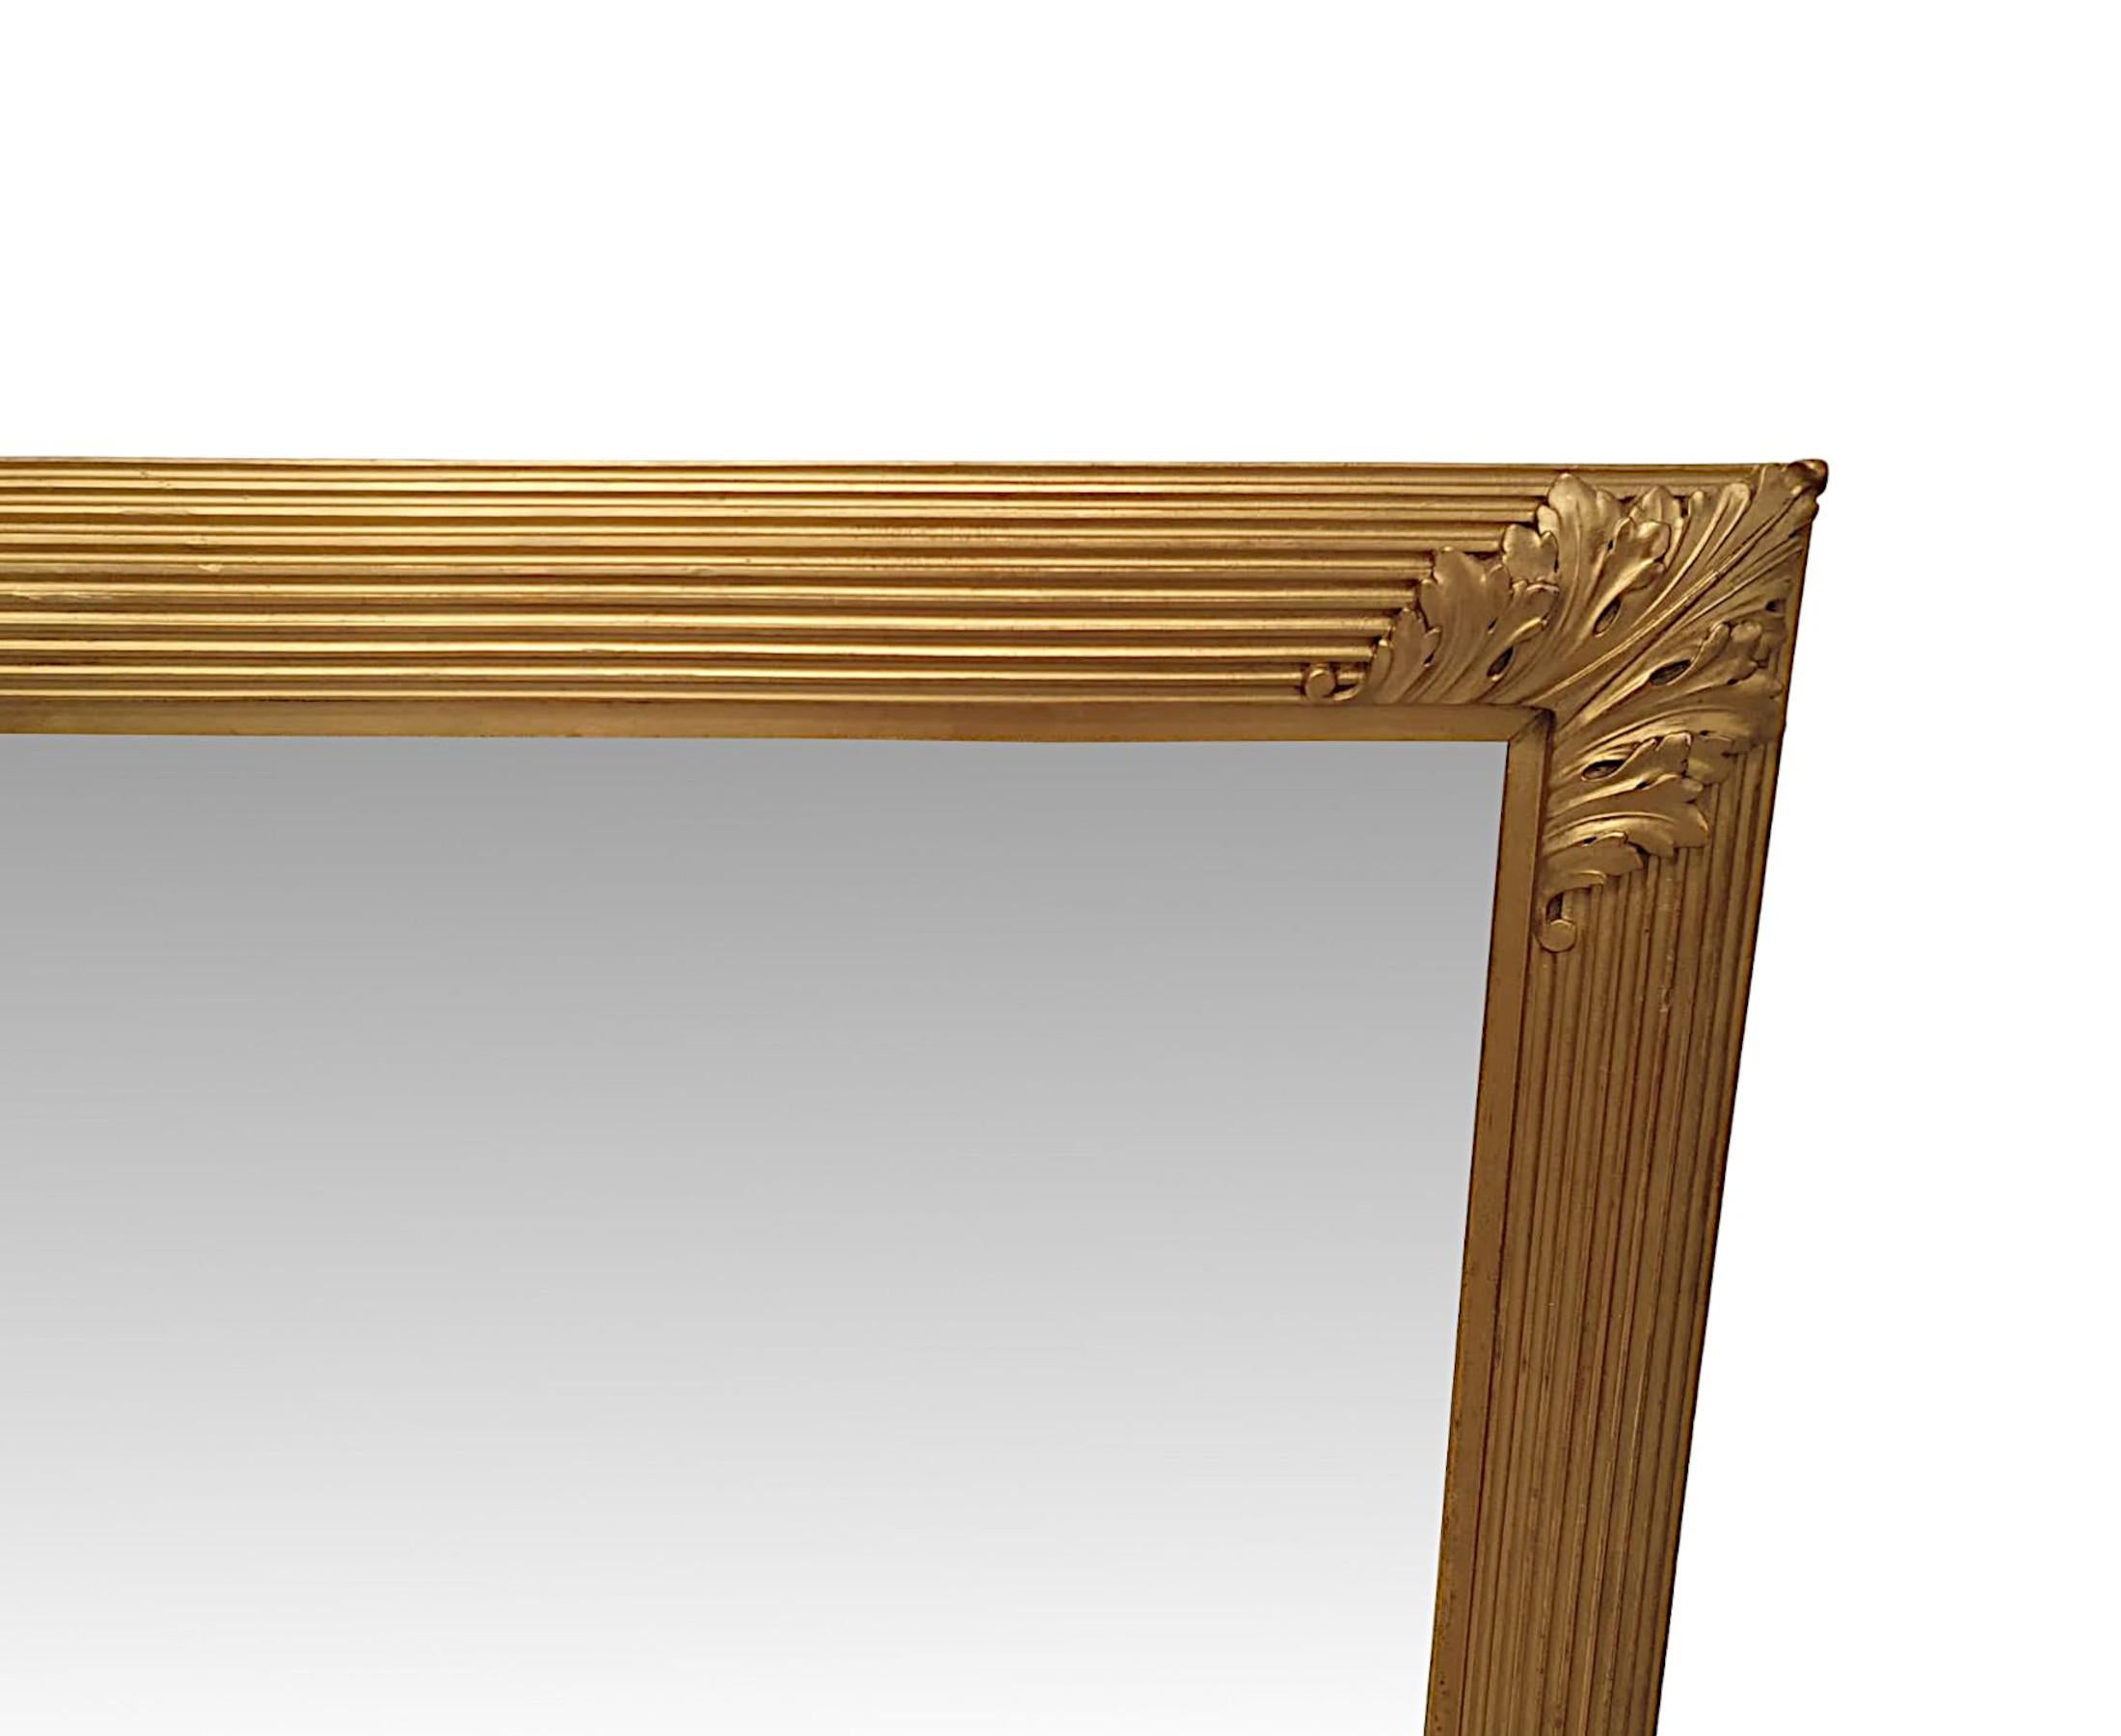 A fantastic 19th century giltwood hall or overmantle mirror of large proportions. The mirror glass plate of rectangular form set within an elegantly simple, hand carved moulded giltwood frame with reeded detail and stunning acanthus leaf motif to